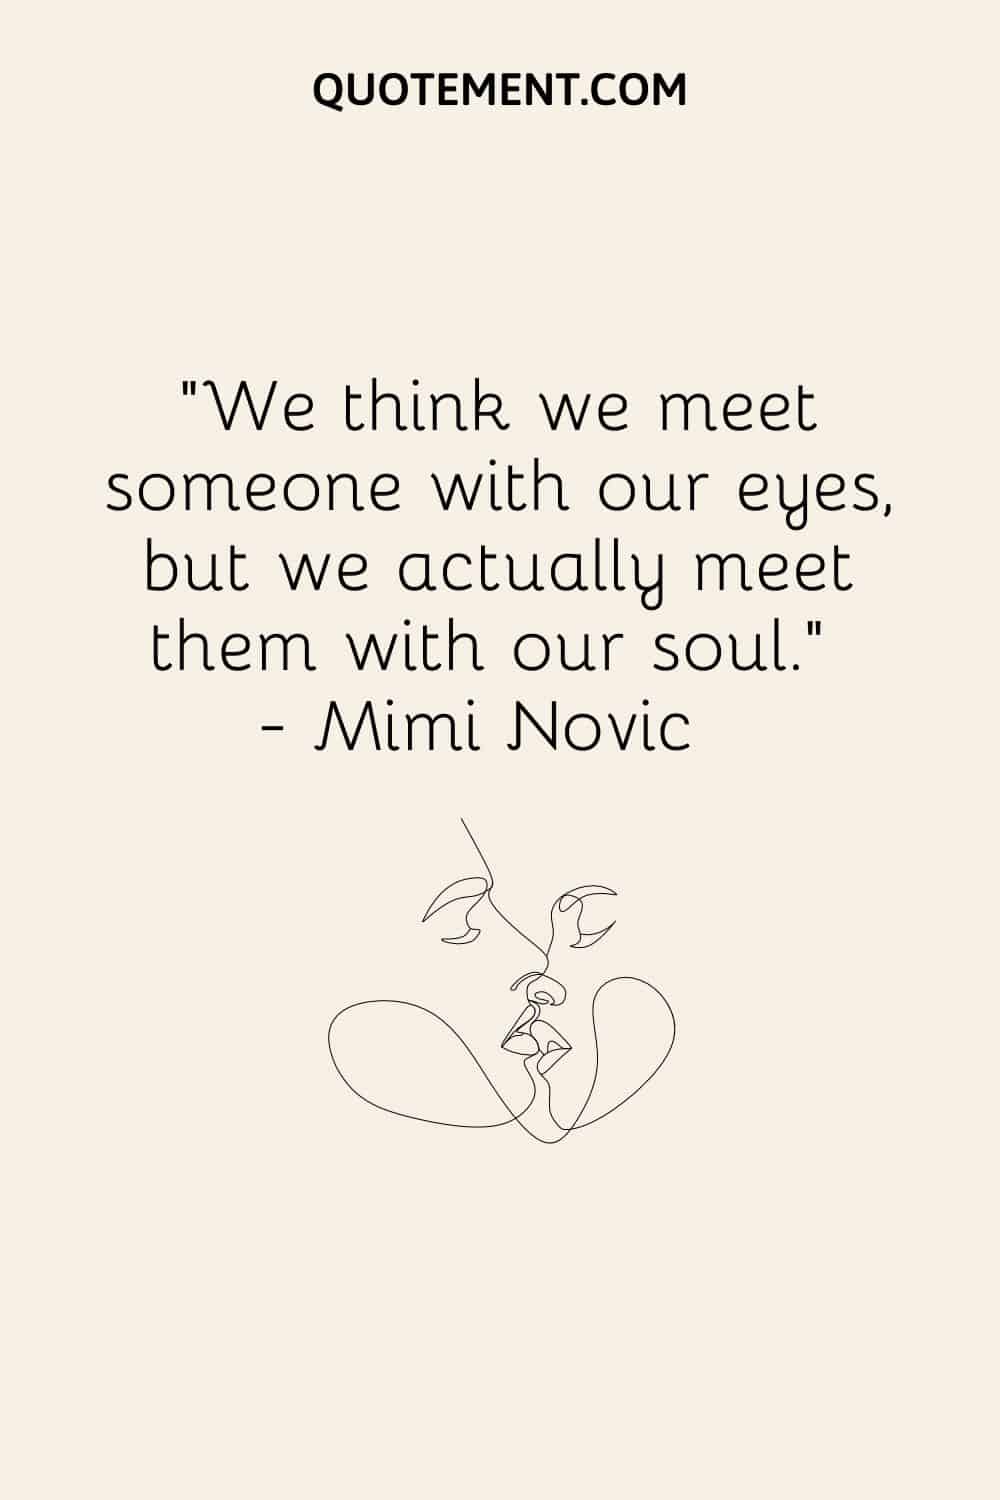 We think we meet someone with our eyes